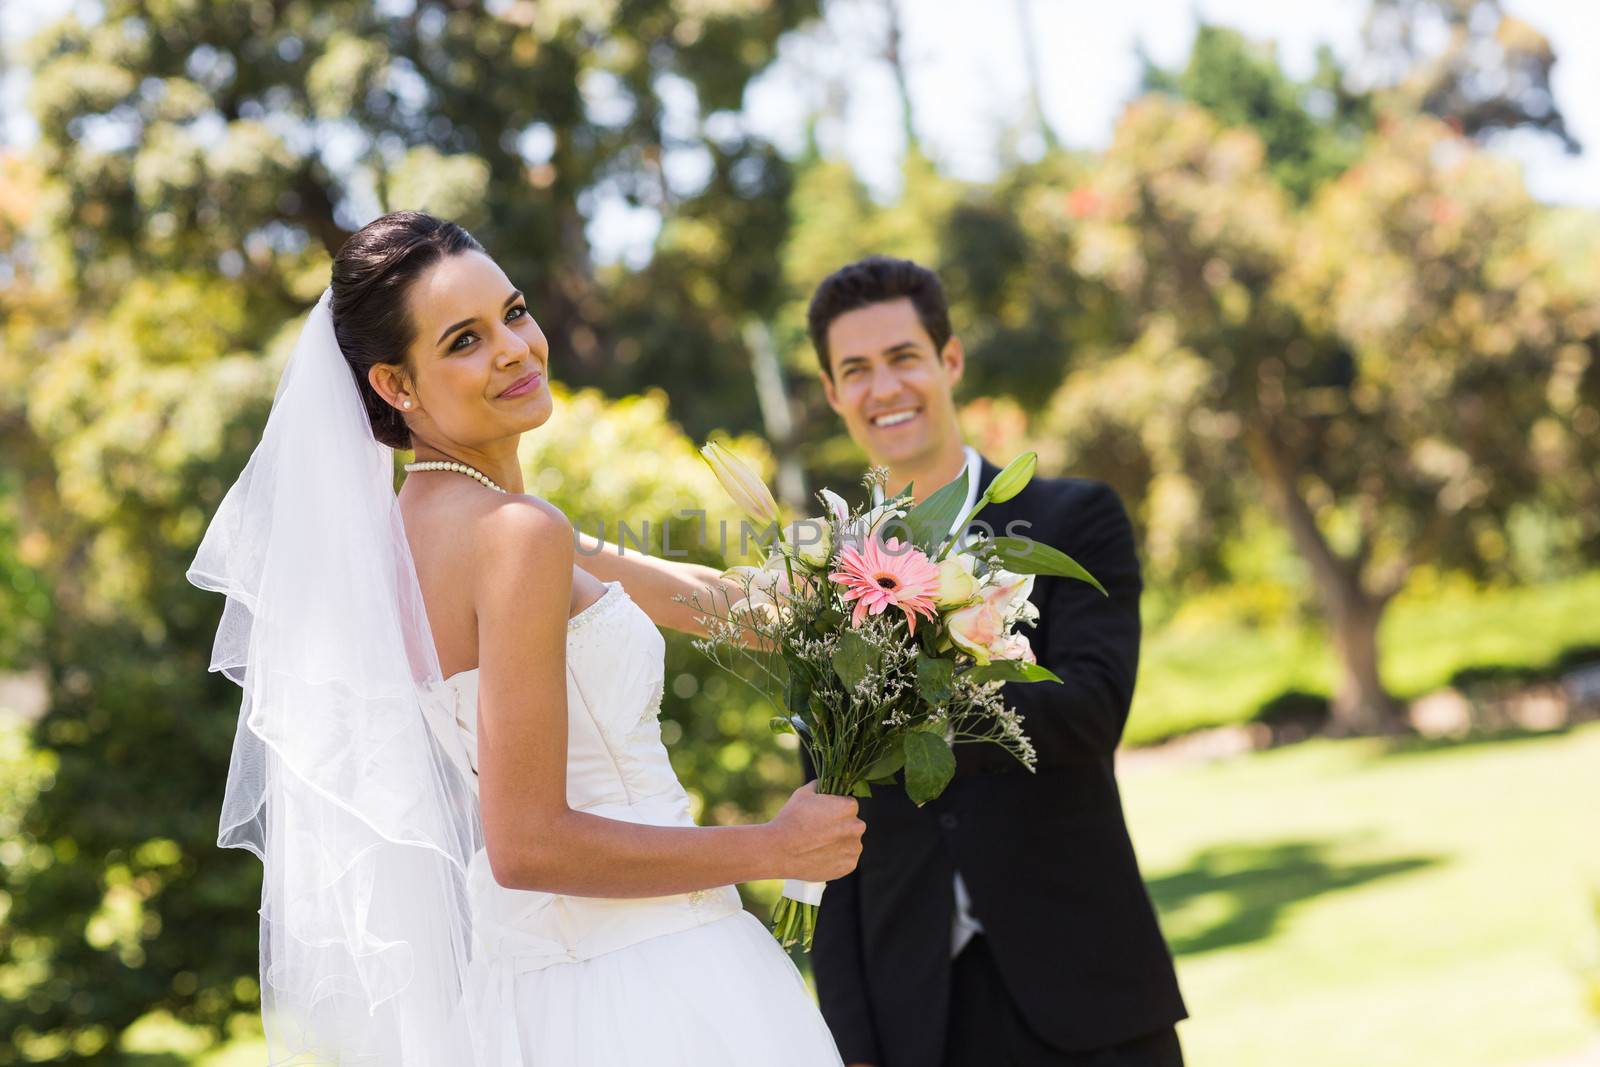 Happy newlywed couple with bouquet in park by Wavebreakmedia